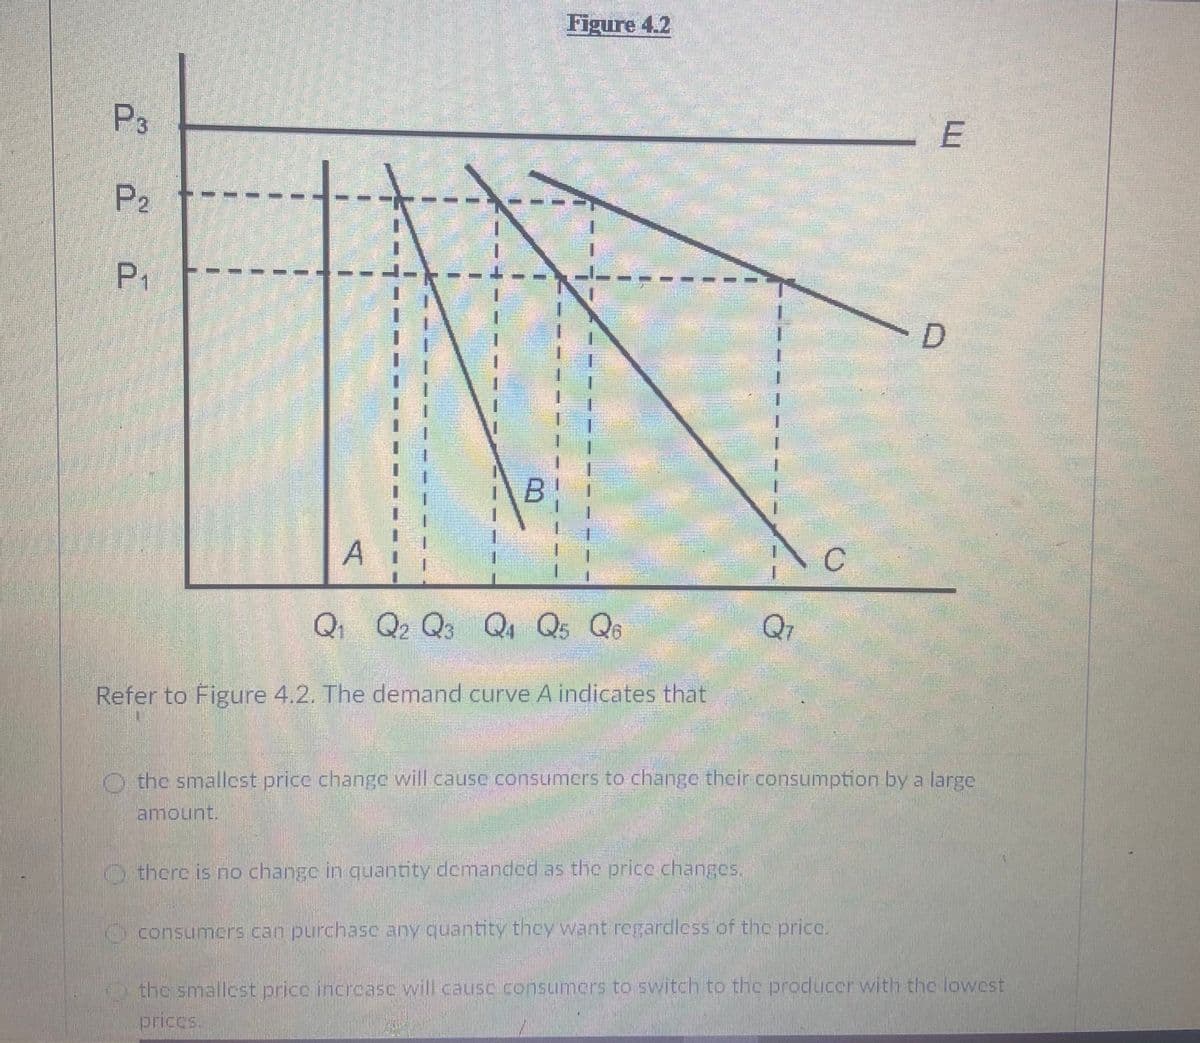 Figure 4.2
P3
P2
P1
A
C
Q Q2 Q3 Q4 Qs Qs
Q7
Refer to Figure 4.2. The demand curve A indicates that
O the smallcst price change will cause consumcrs to change their consumption by a large
amount,
O therc is no change in quantity demandcd as the price changes.
consumcrs can purchase any quantity they want regardless of the price,
Oithc smalcst price incrcasc wil.causc.consuners to switch to the producer with thc lowest
